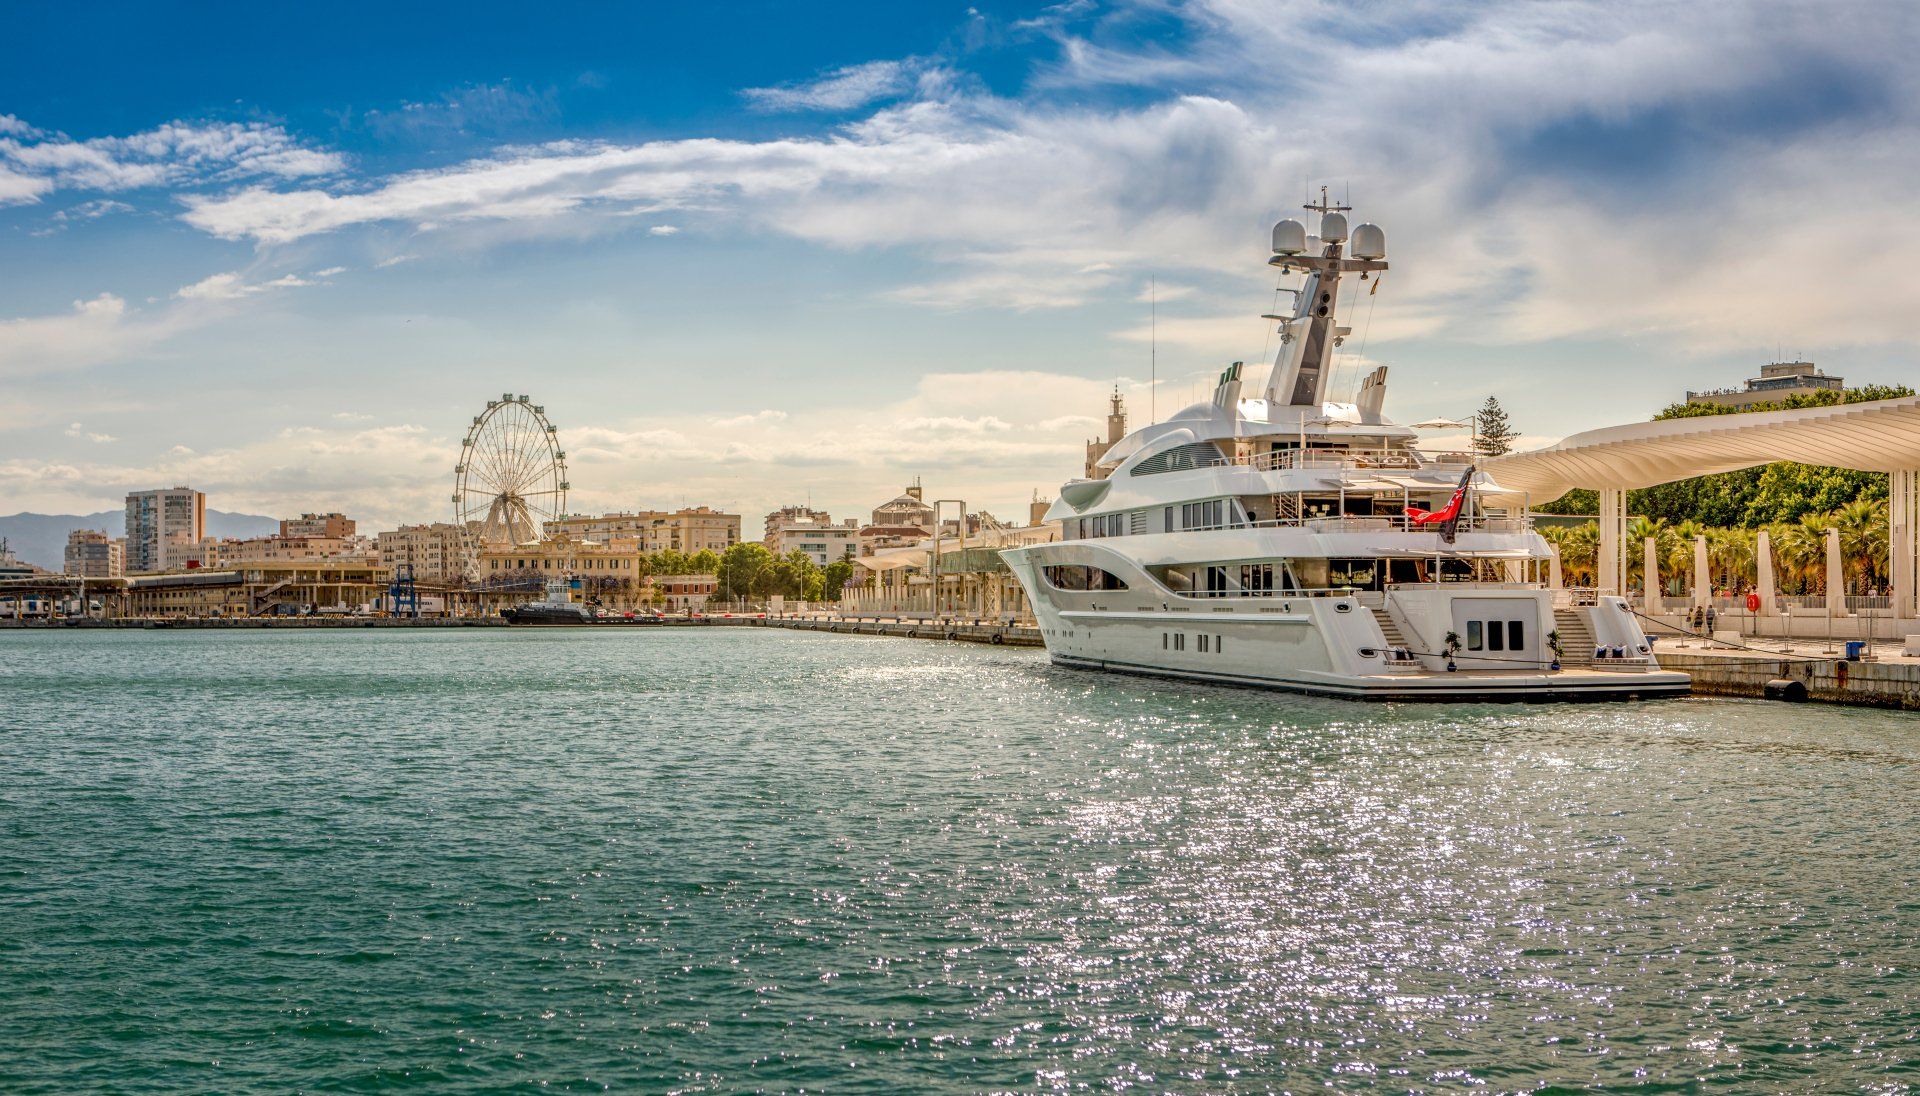 Picture of Marina Malaga, with a big ferris wheel and a superyacht